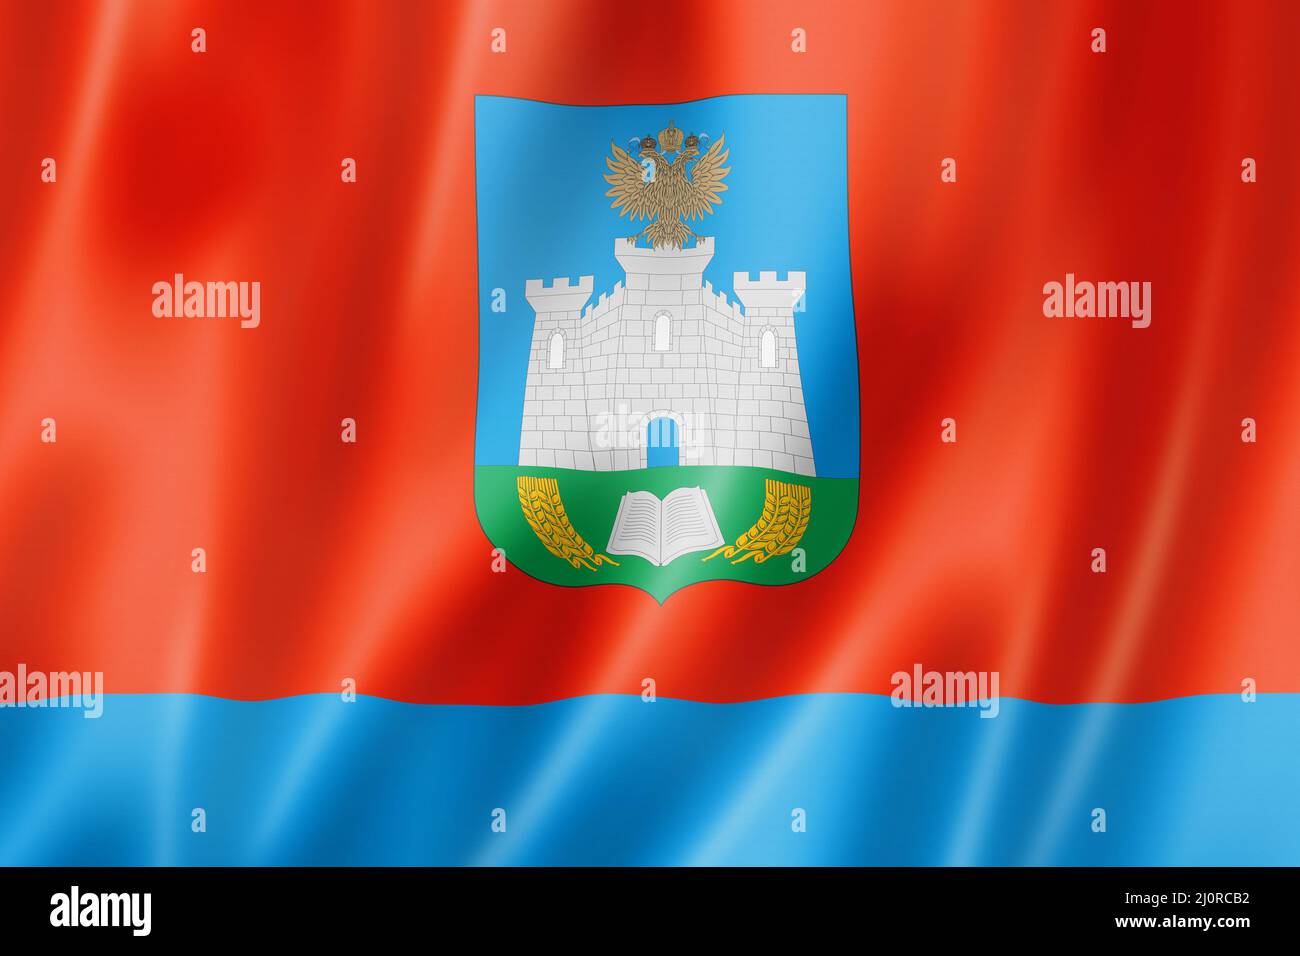 Oryol state - Oblast -  flag, Russia Stock Photo